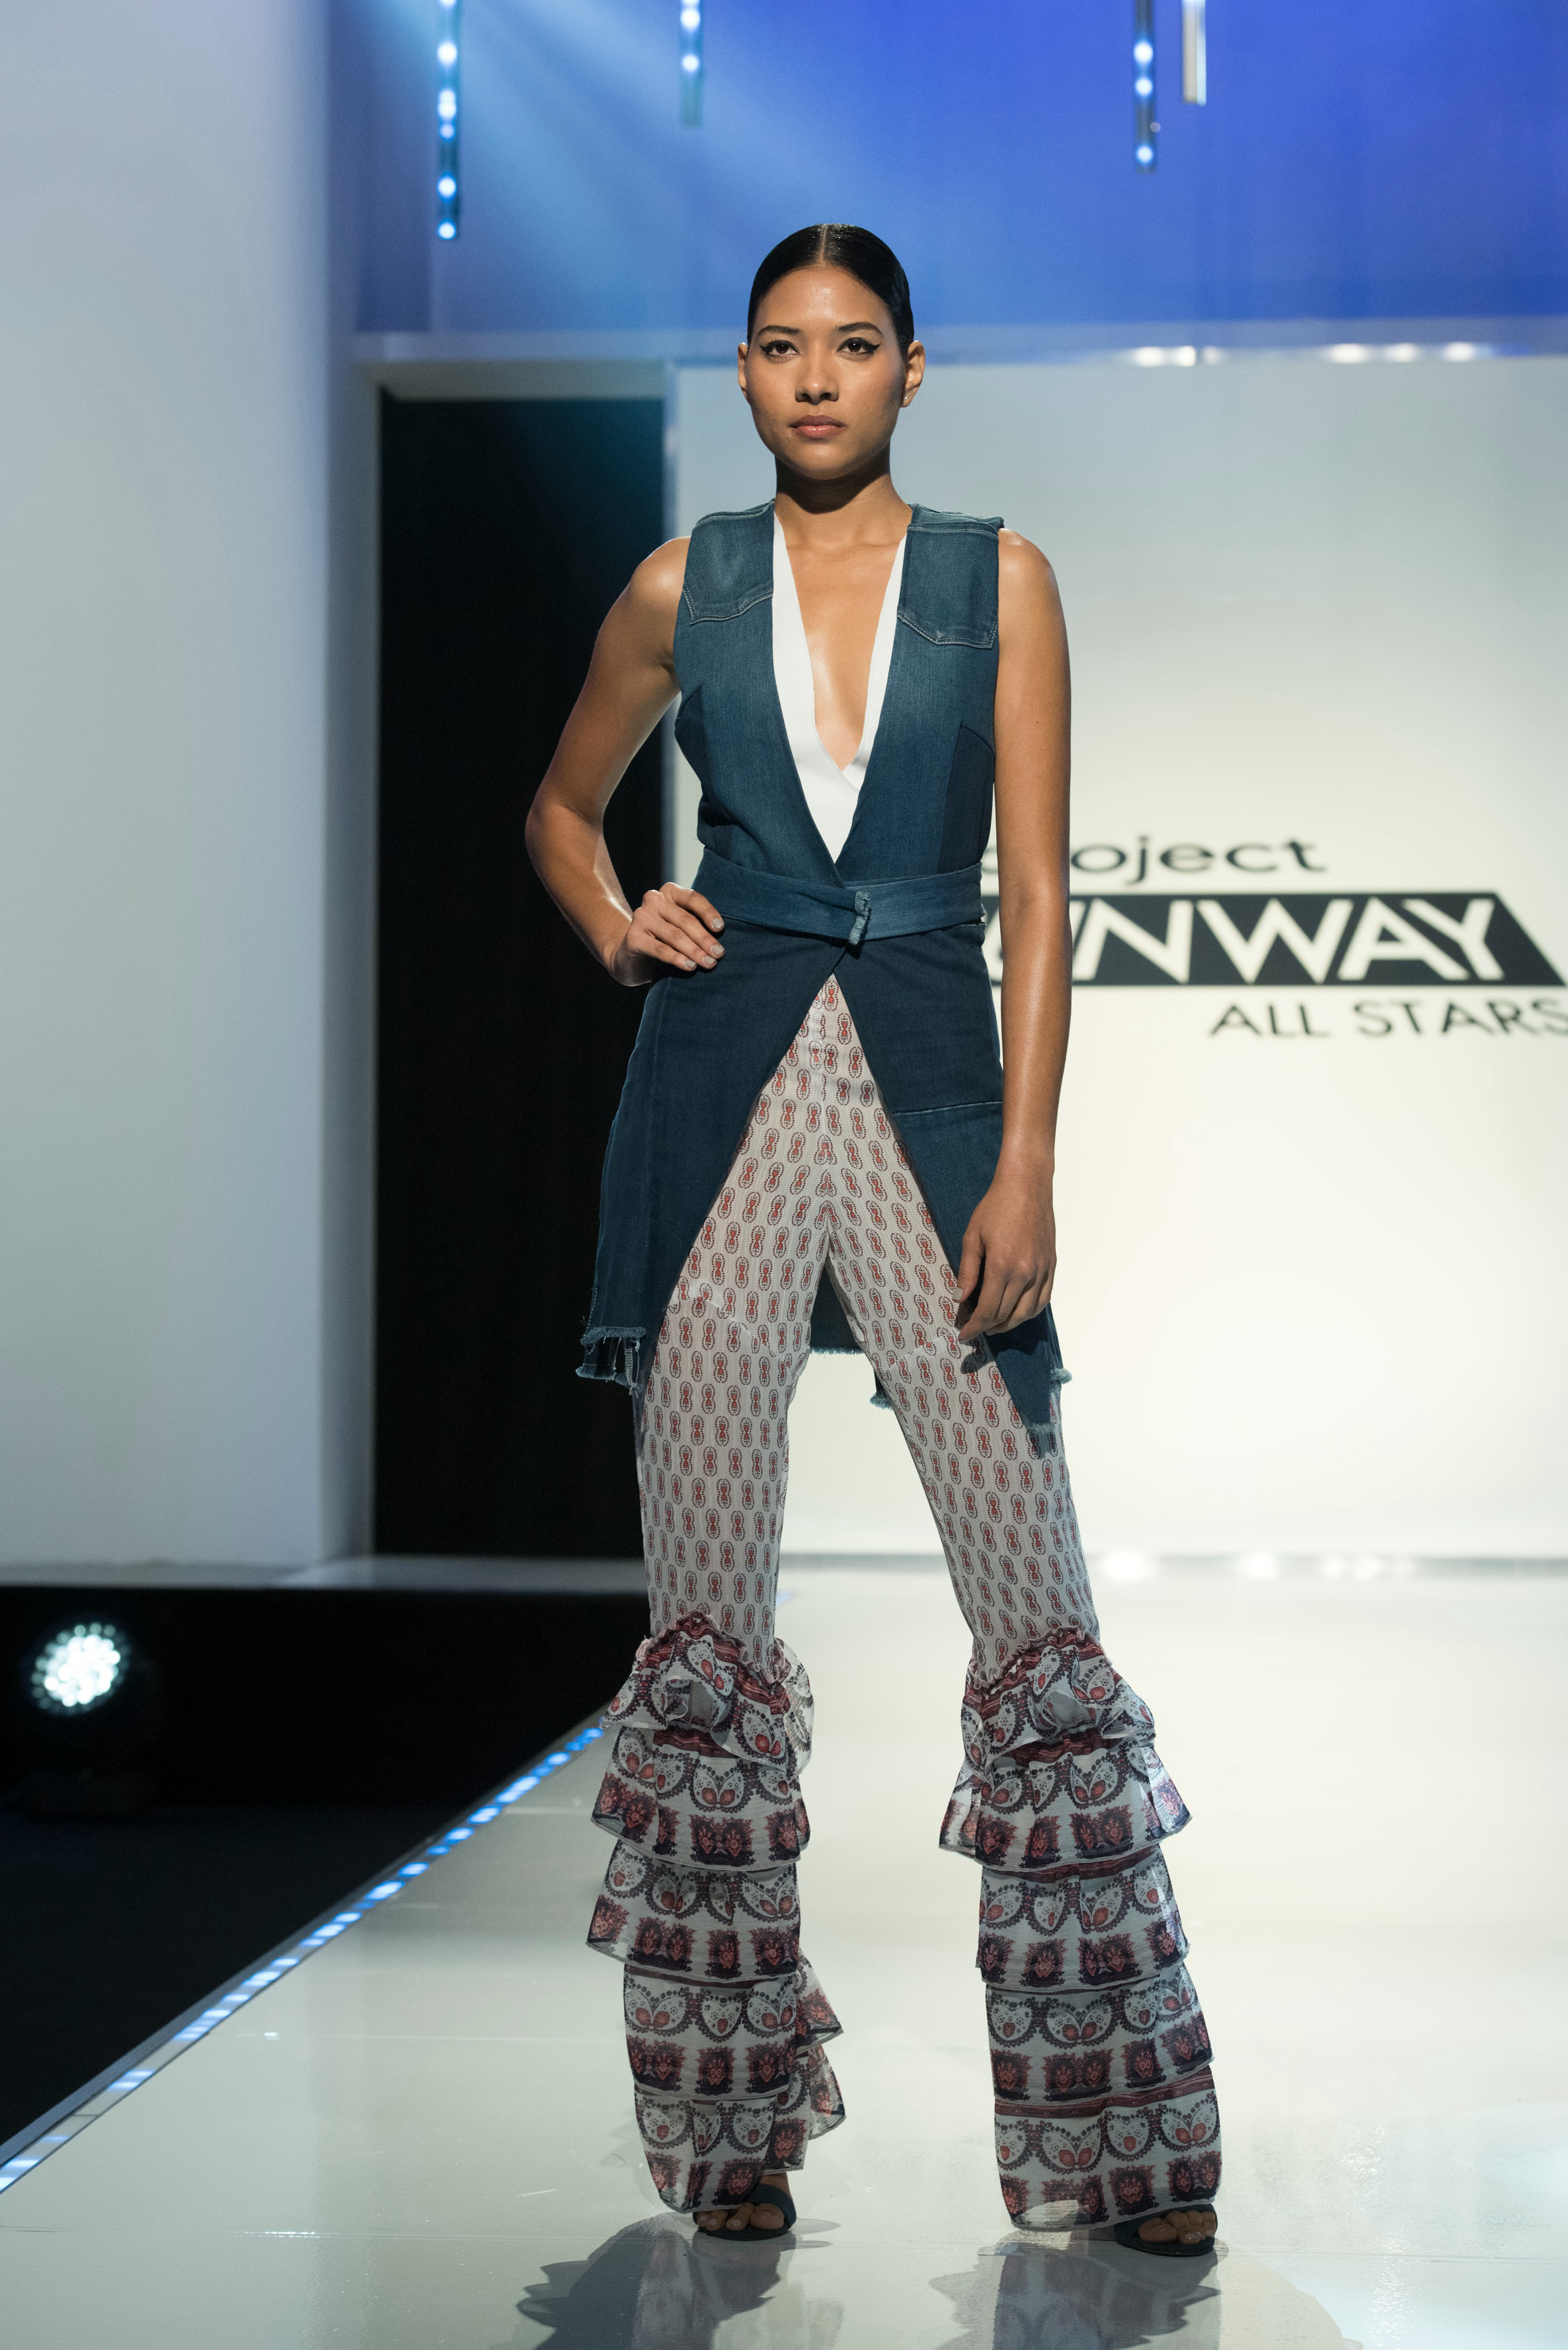 Project Runway All Stars recap Upcycled separates